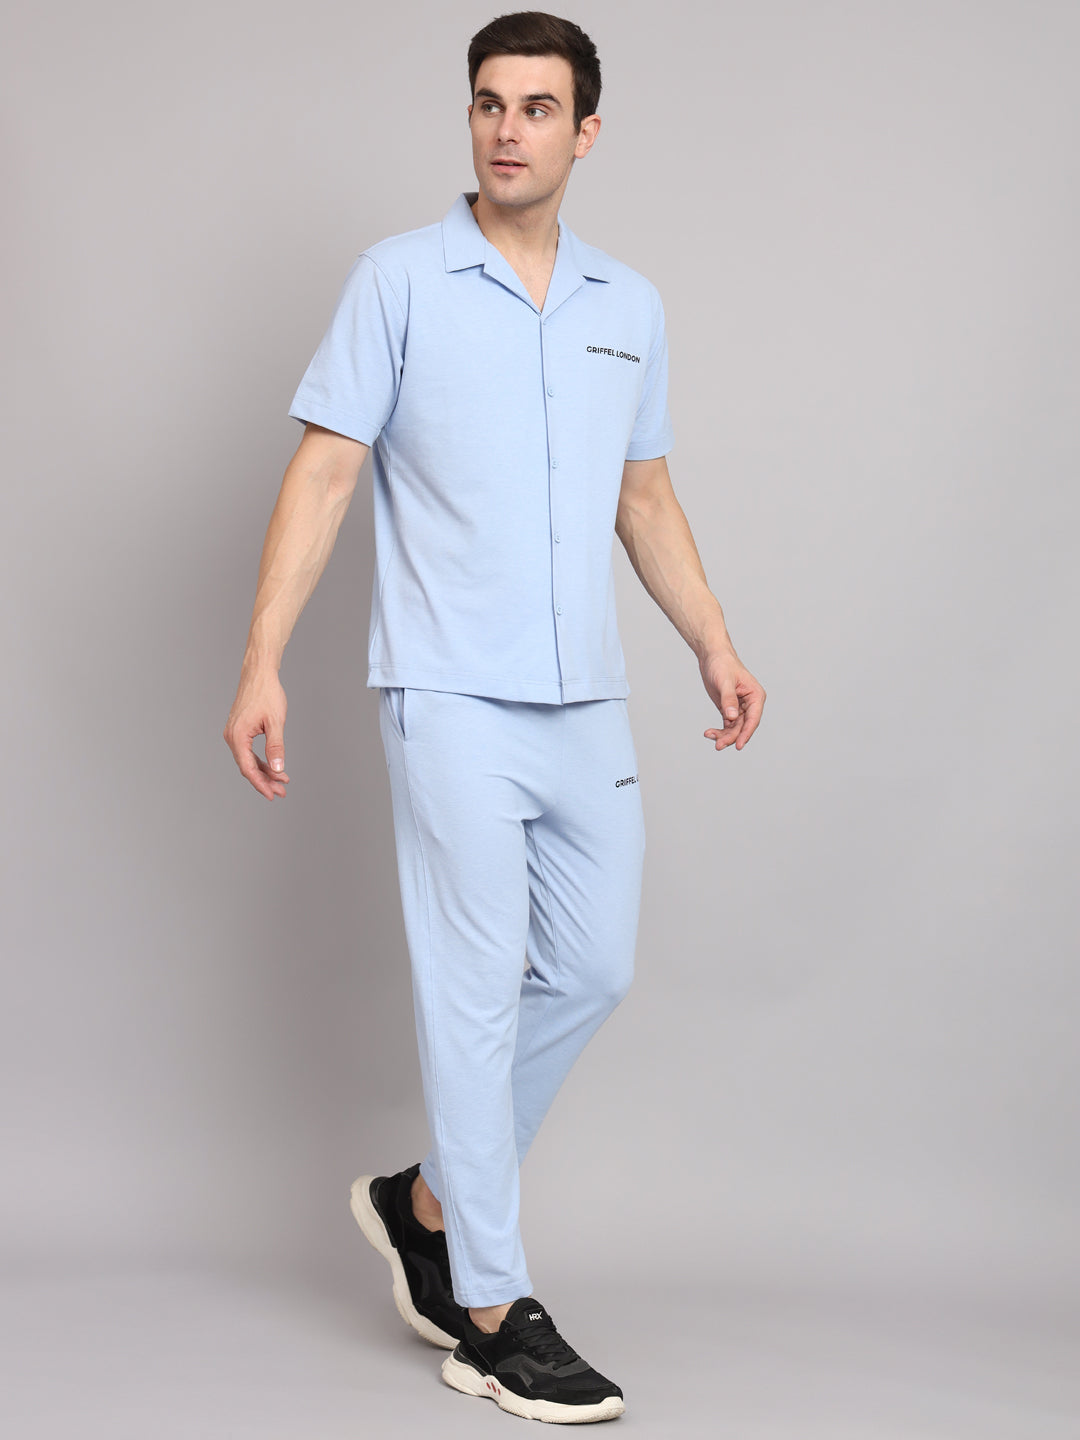 Griffel Men's Pre Winter Front Logo Solid Cotton Basic Sky Blue Bowling Shirt and Joggers Full Co-Ord Set - griffel